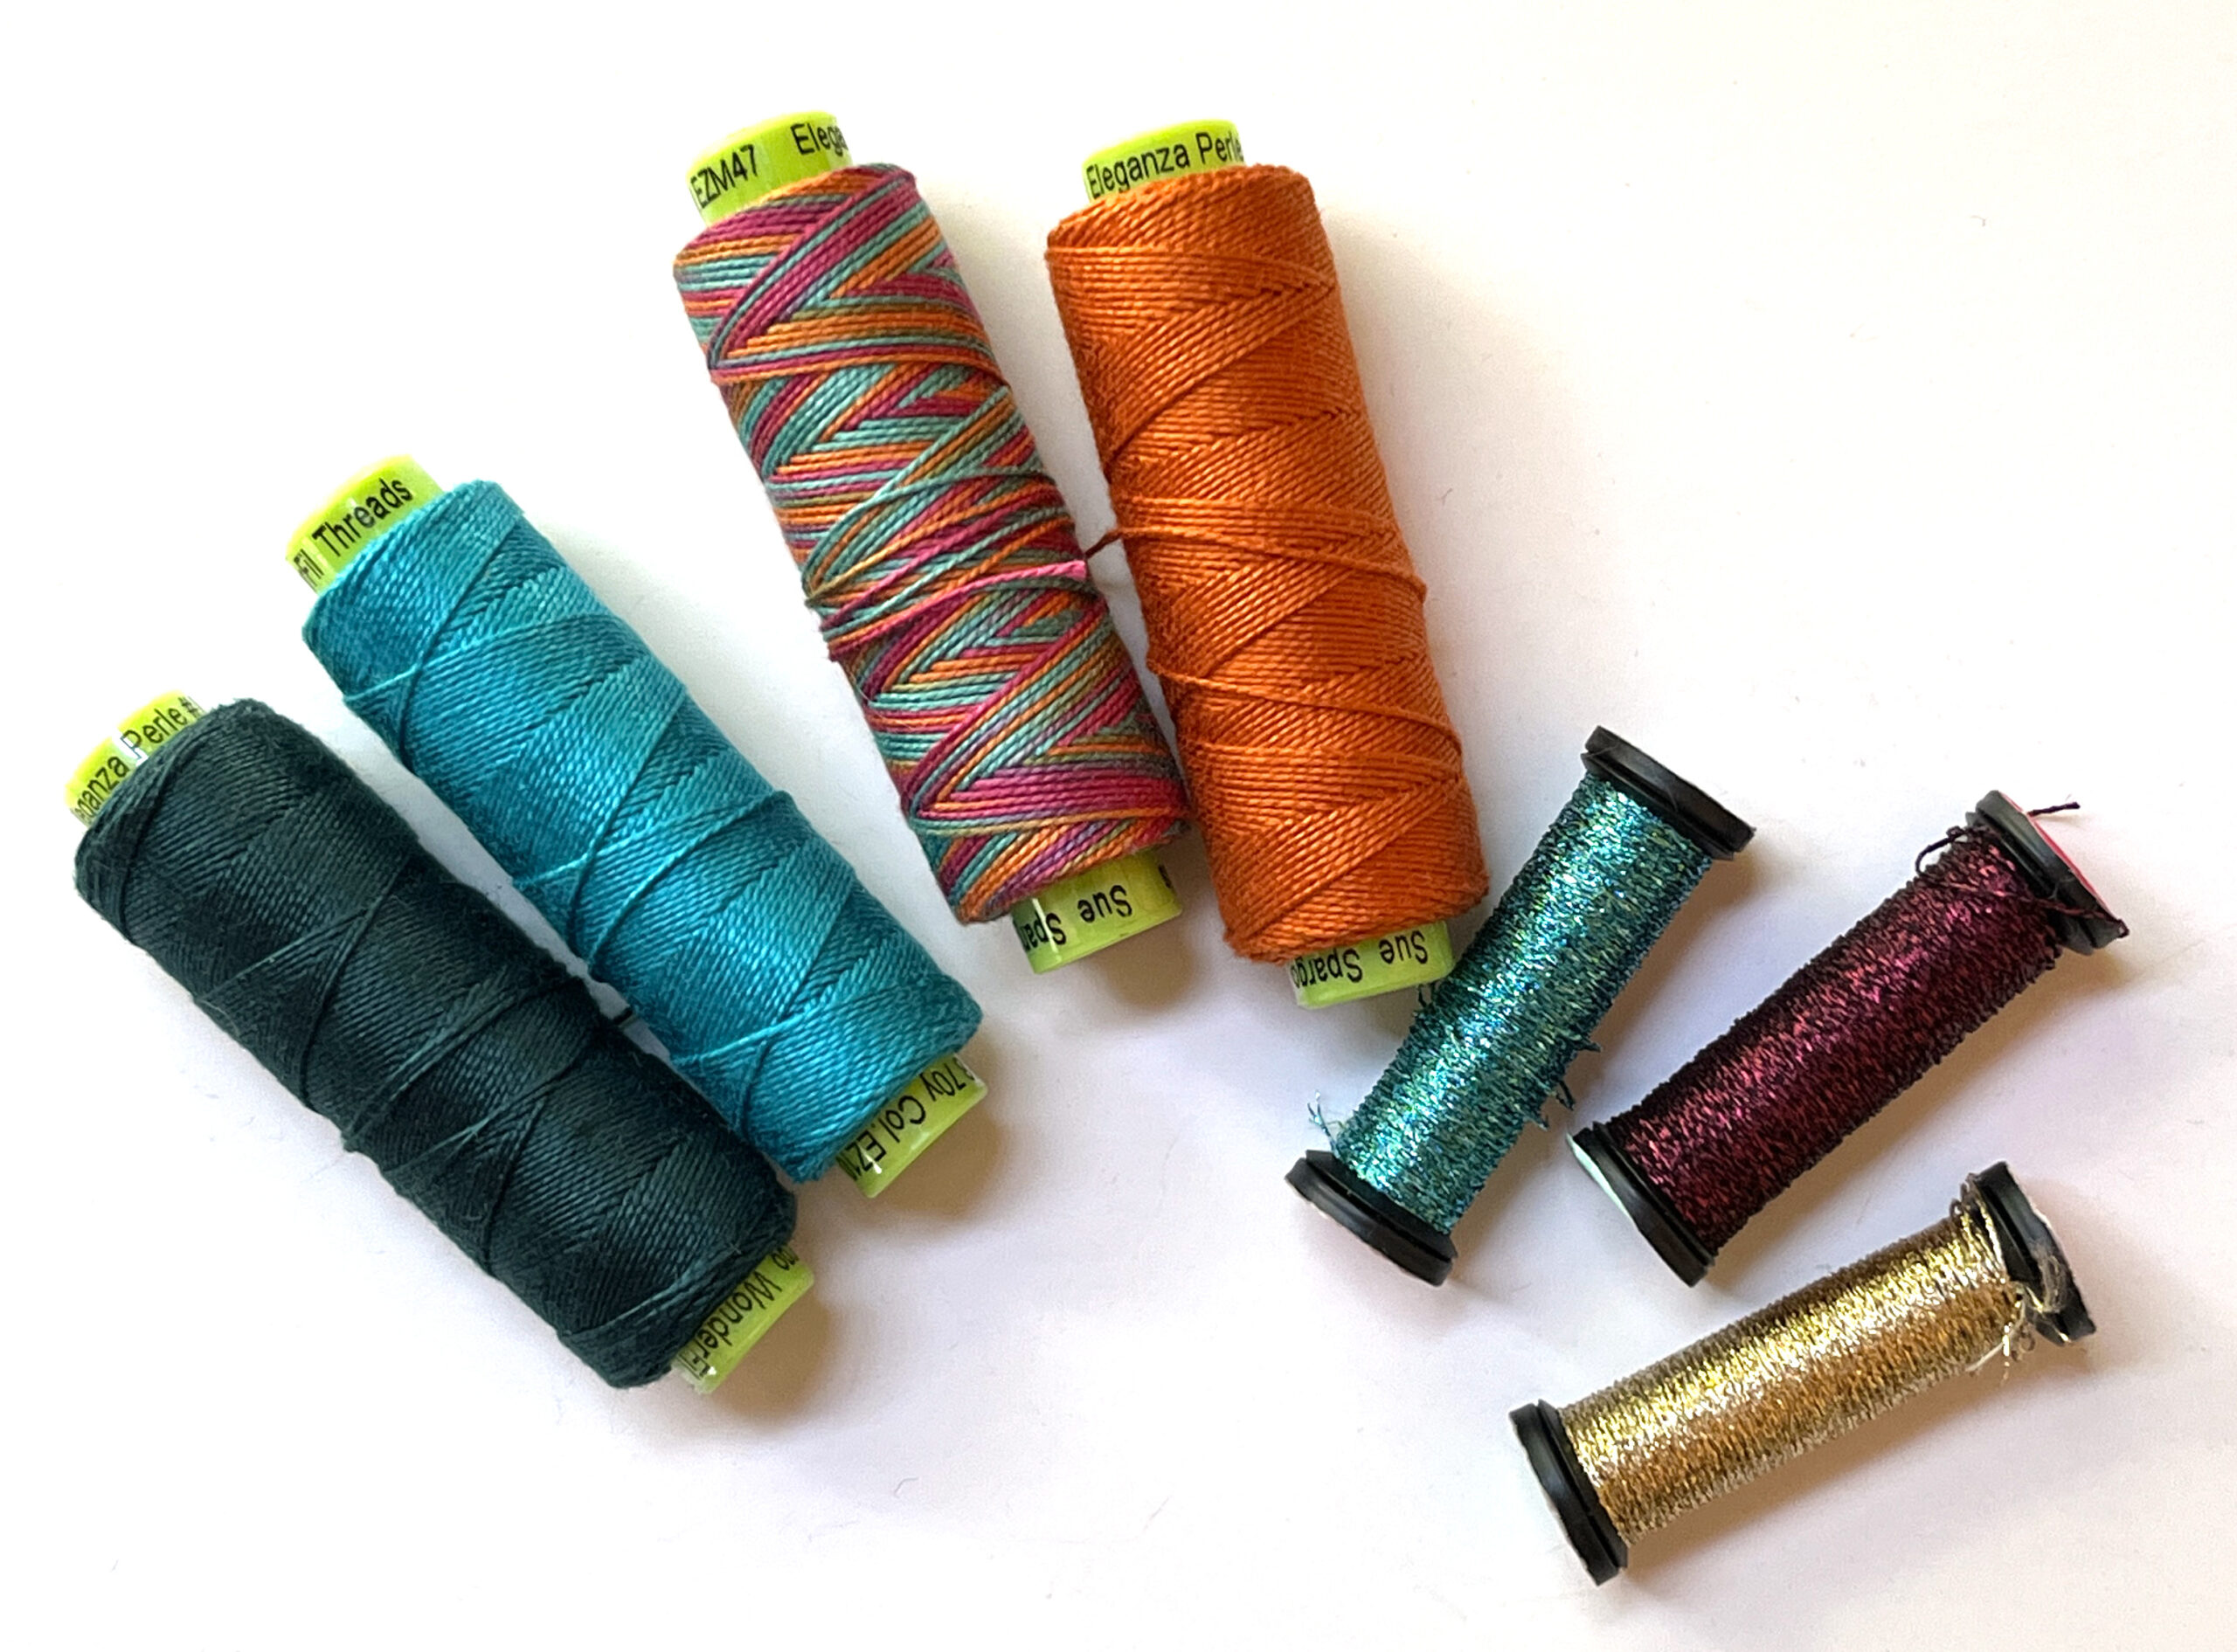 Metallic Embroidery Floss Metallic Thread Sewing Colorful Sewing Thread